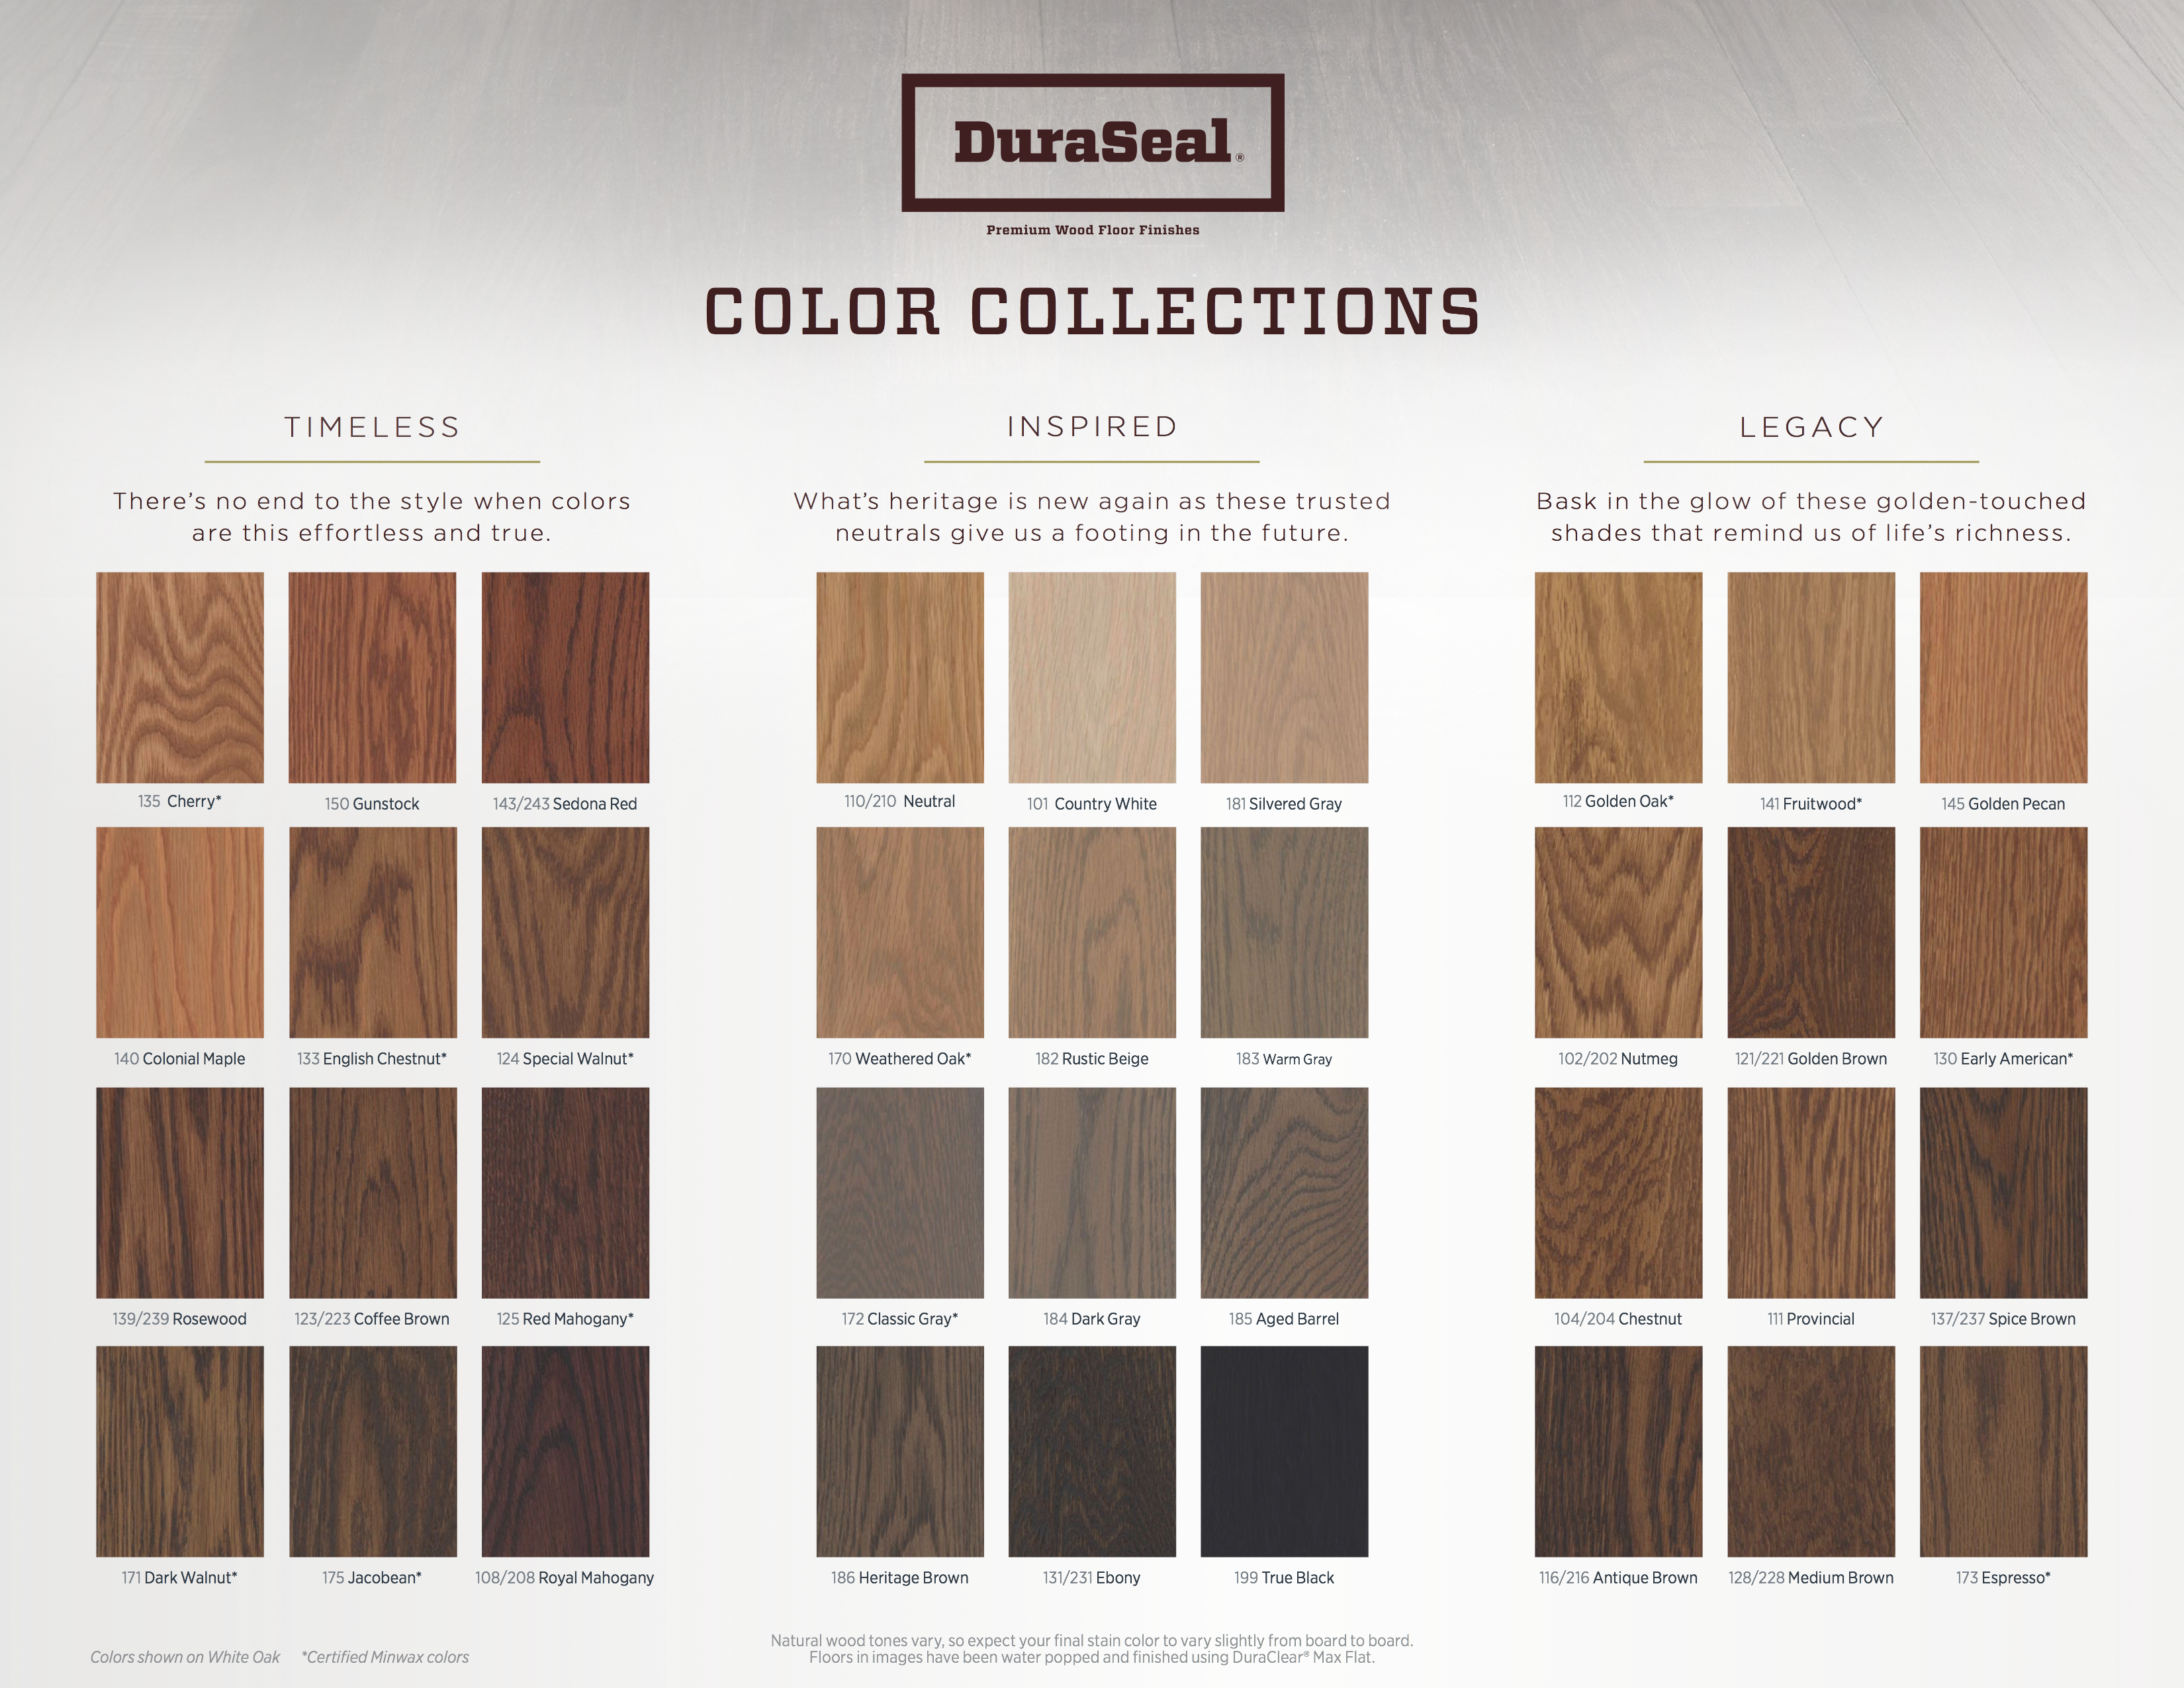 Duraseal new stain colors chart